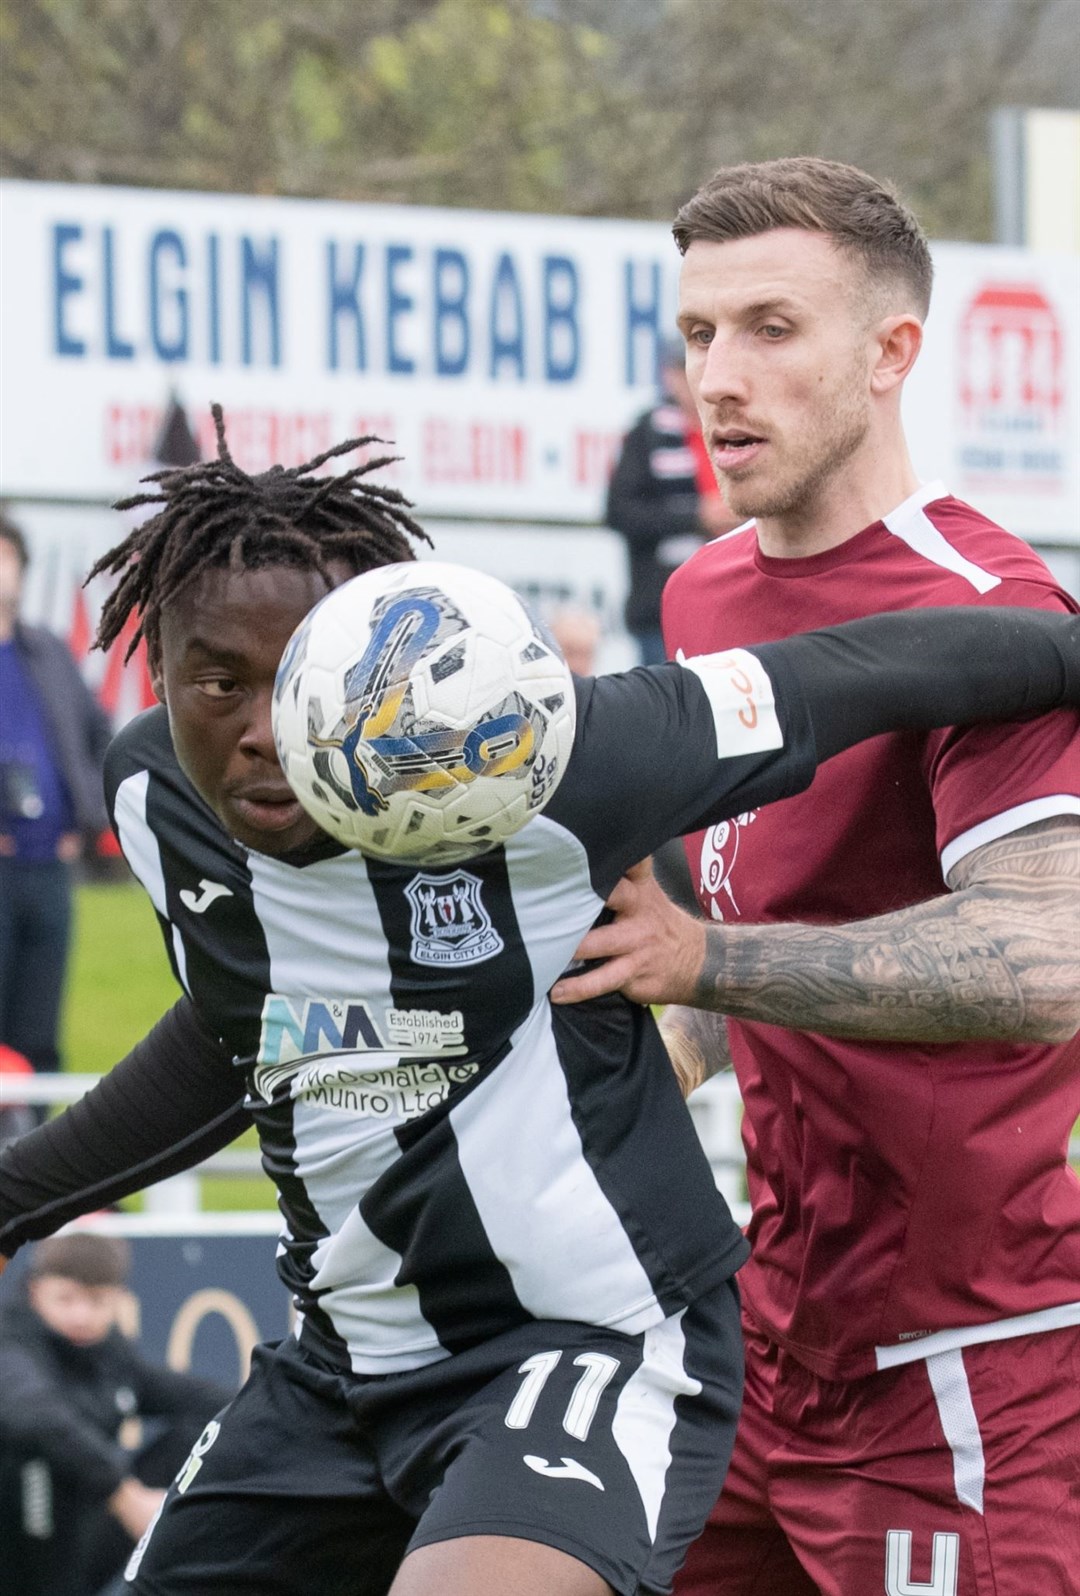 Eyes on the ball for Elgin's Michael Dangana and Clyde's Lee Hamilton. Elgin City FC (0) vs Clyde FC (3) - Scottish League Two 23/24 - Borough Briggs, Elgin 4/5/2024.Picture: Daniel Forsyth.